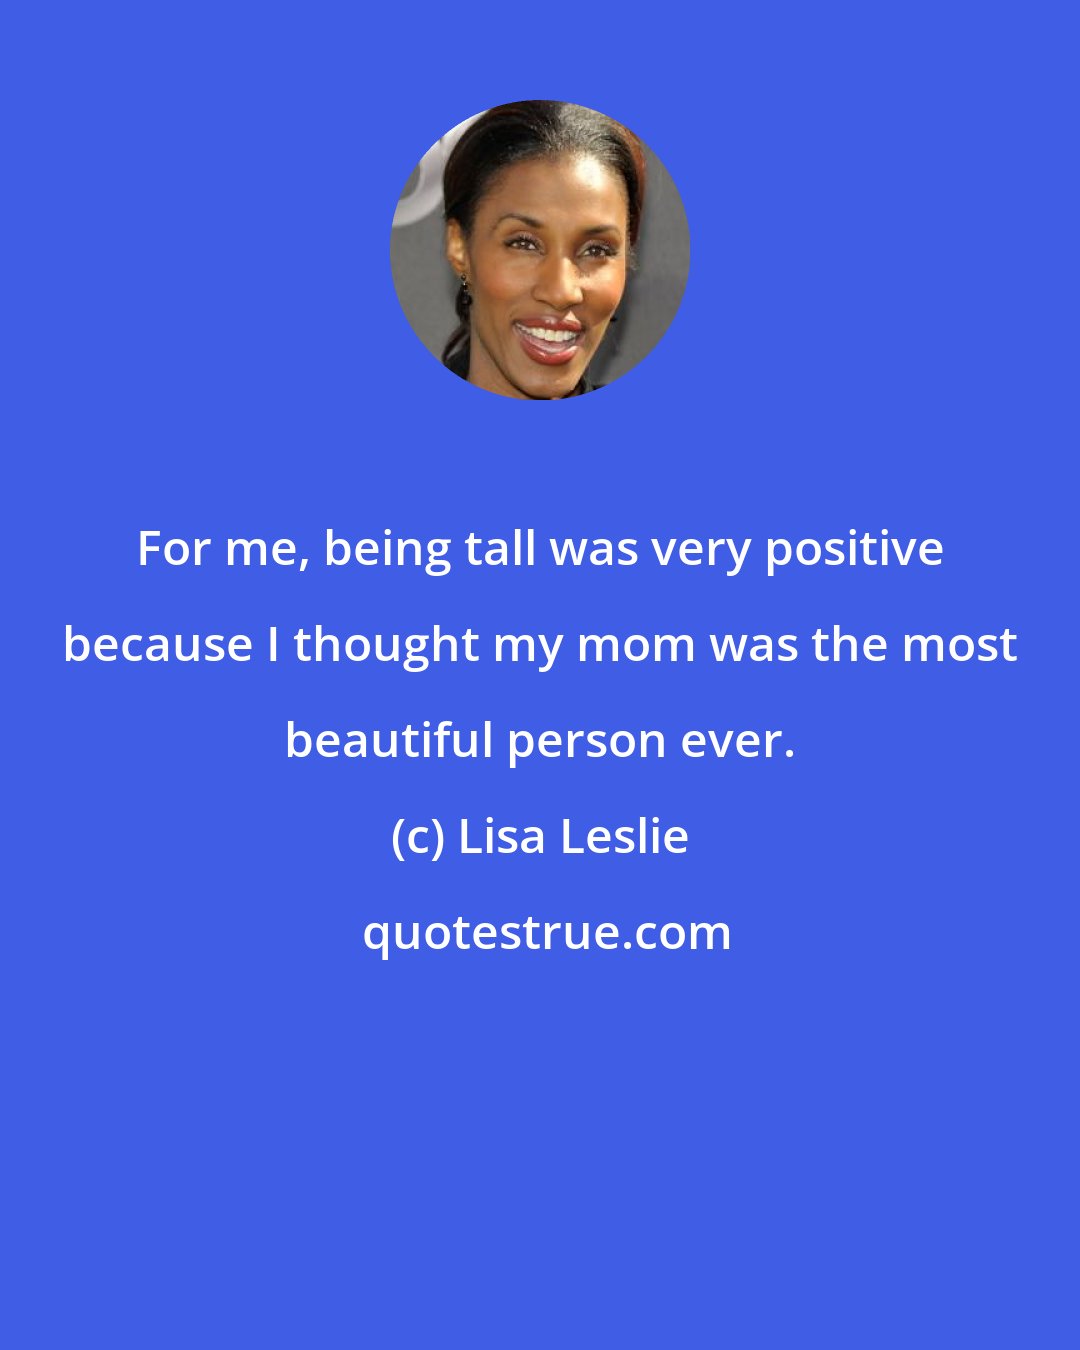 Lisa Leslie: For me, being tall was very positive because I thought my mom was the most beautiful person ever.